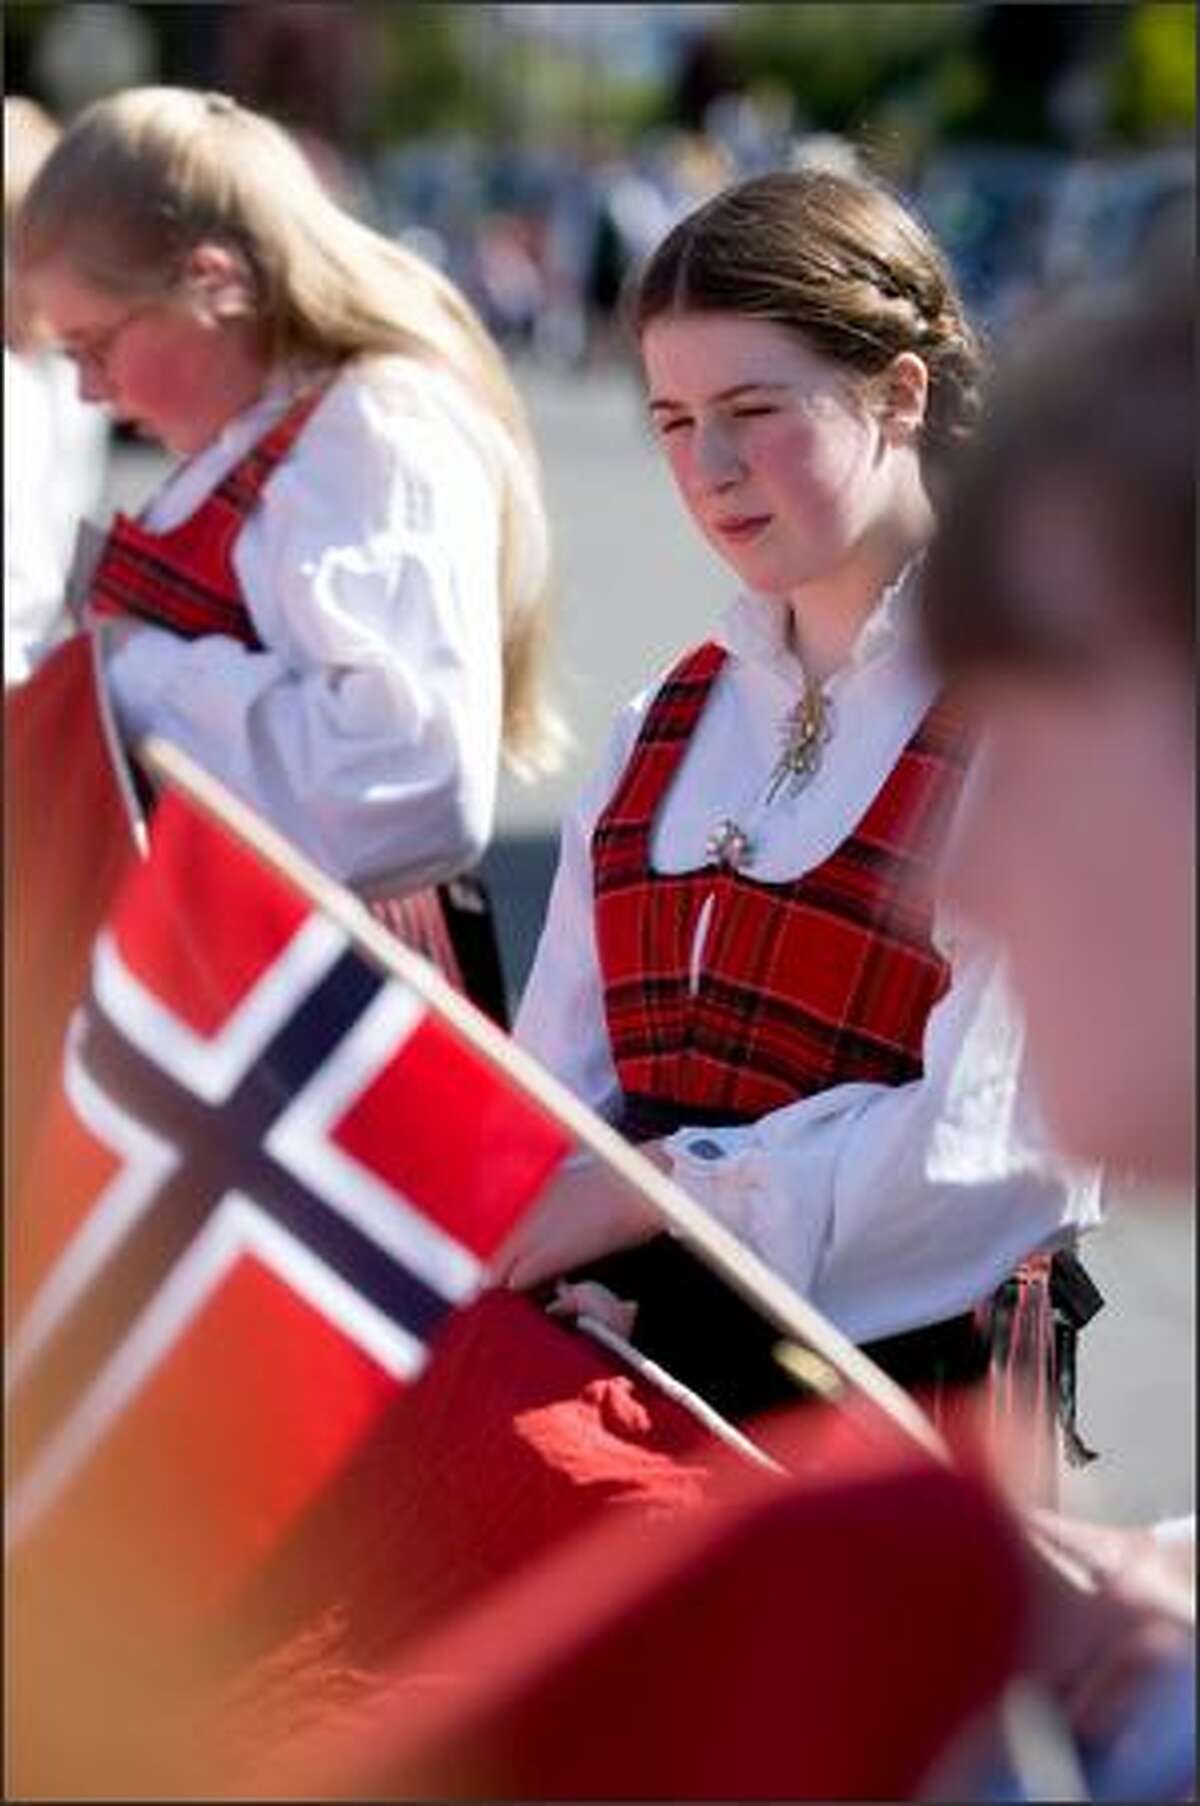 Anna Ripley, 12, relaxes alongside sister Tera Jane, 13, left, before the start of the Norwegian Constitution Day parade in Ballard.